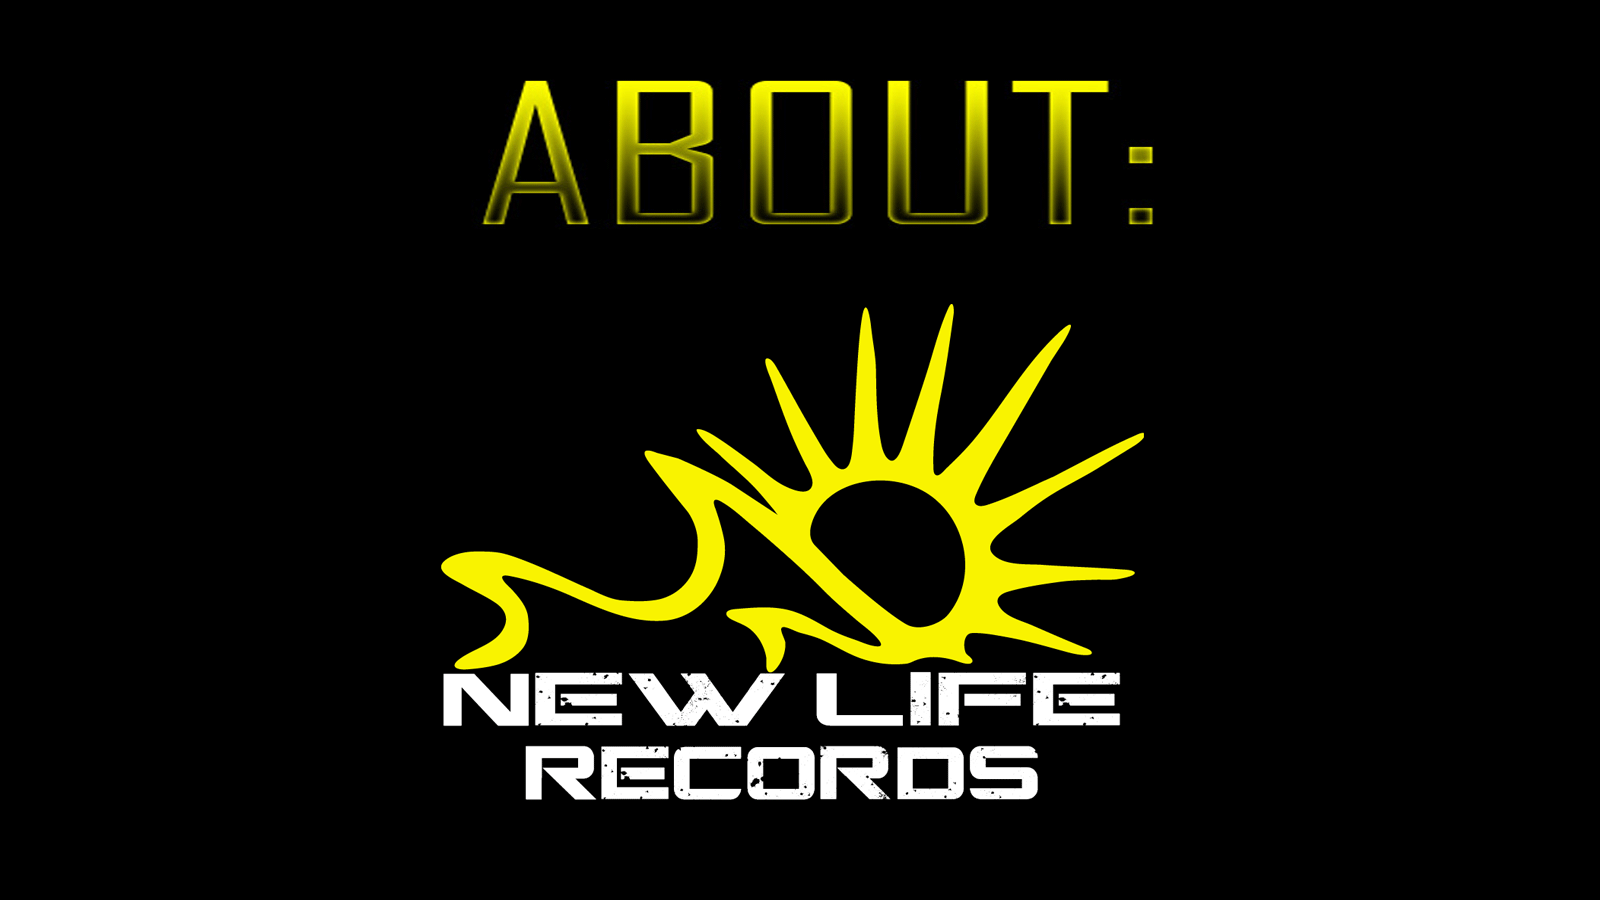 About: New Life Records